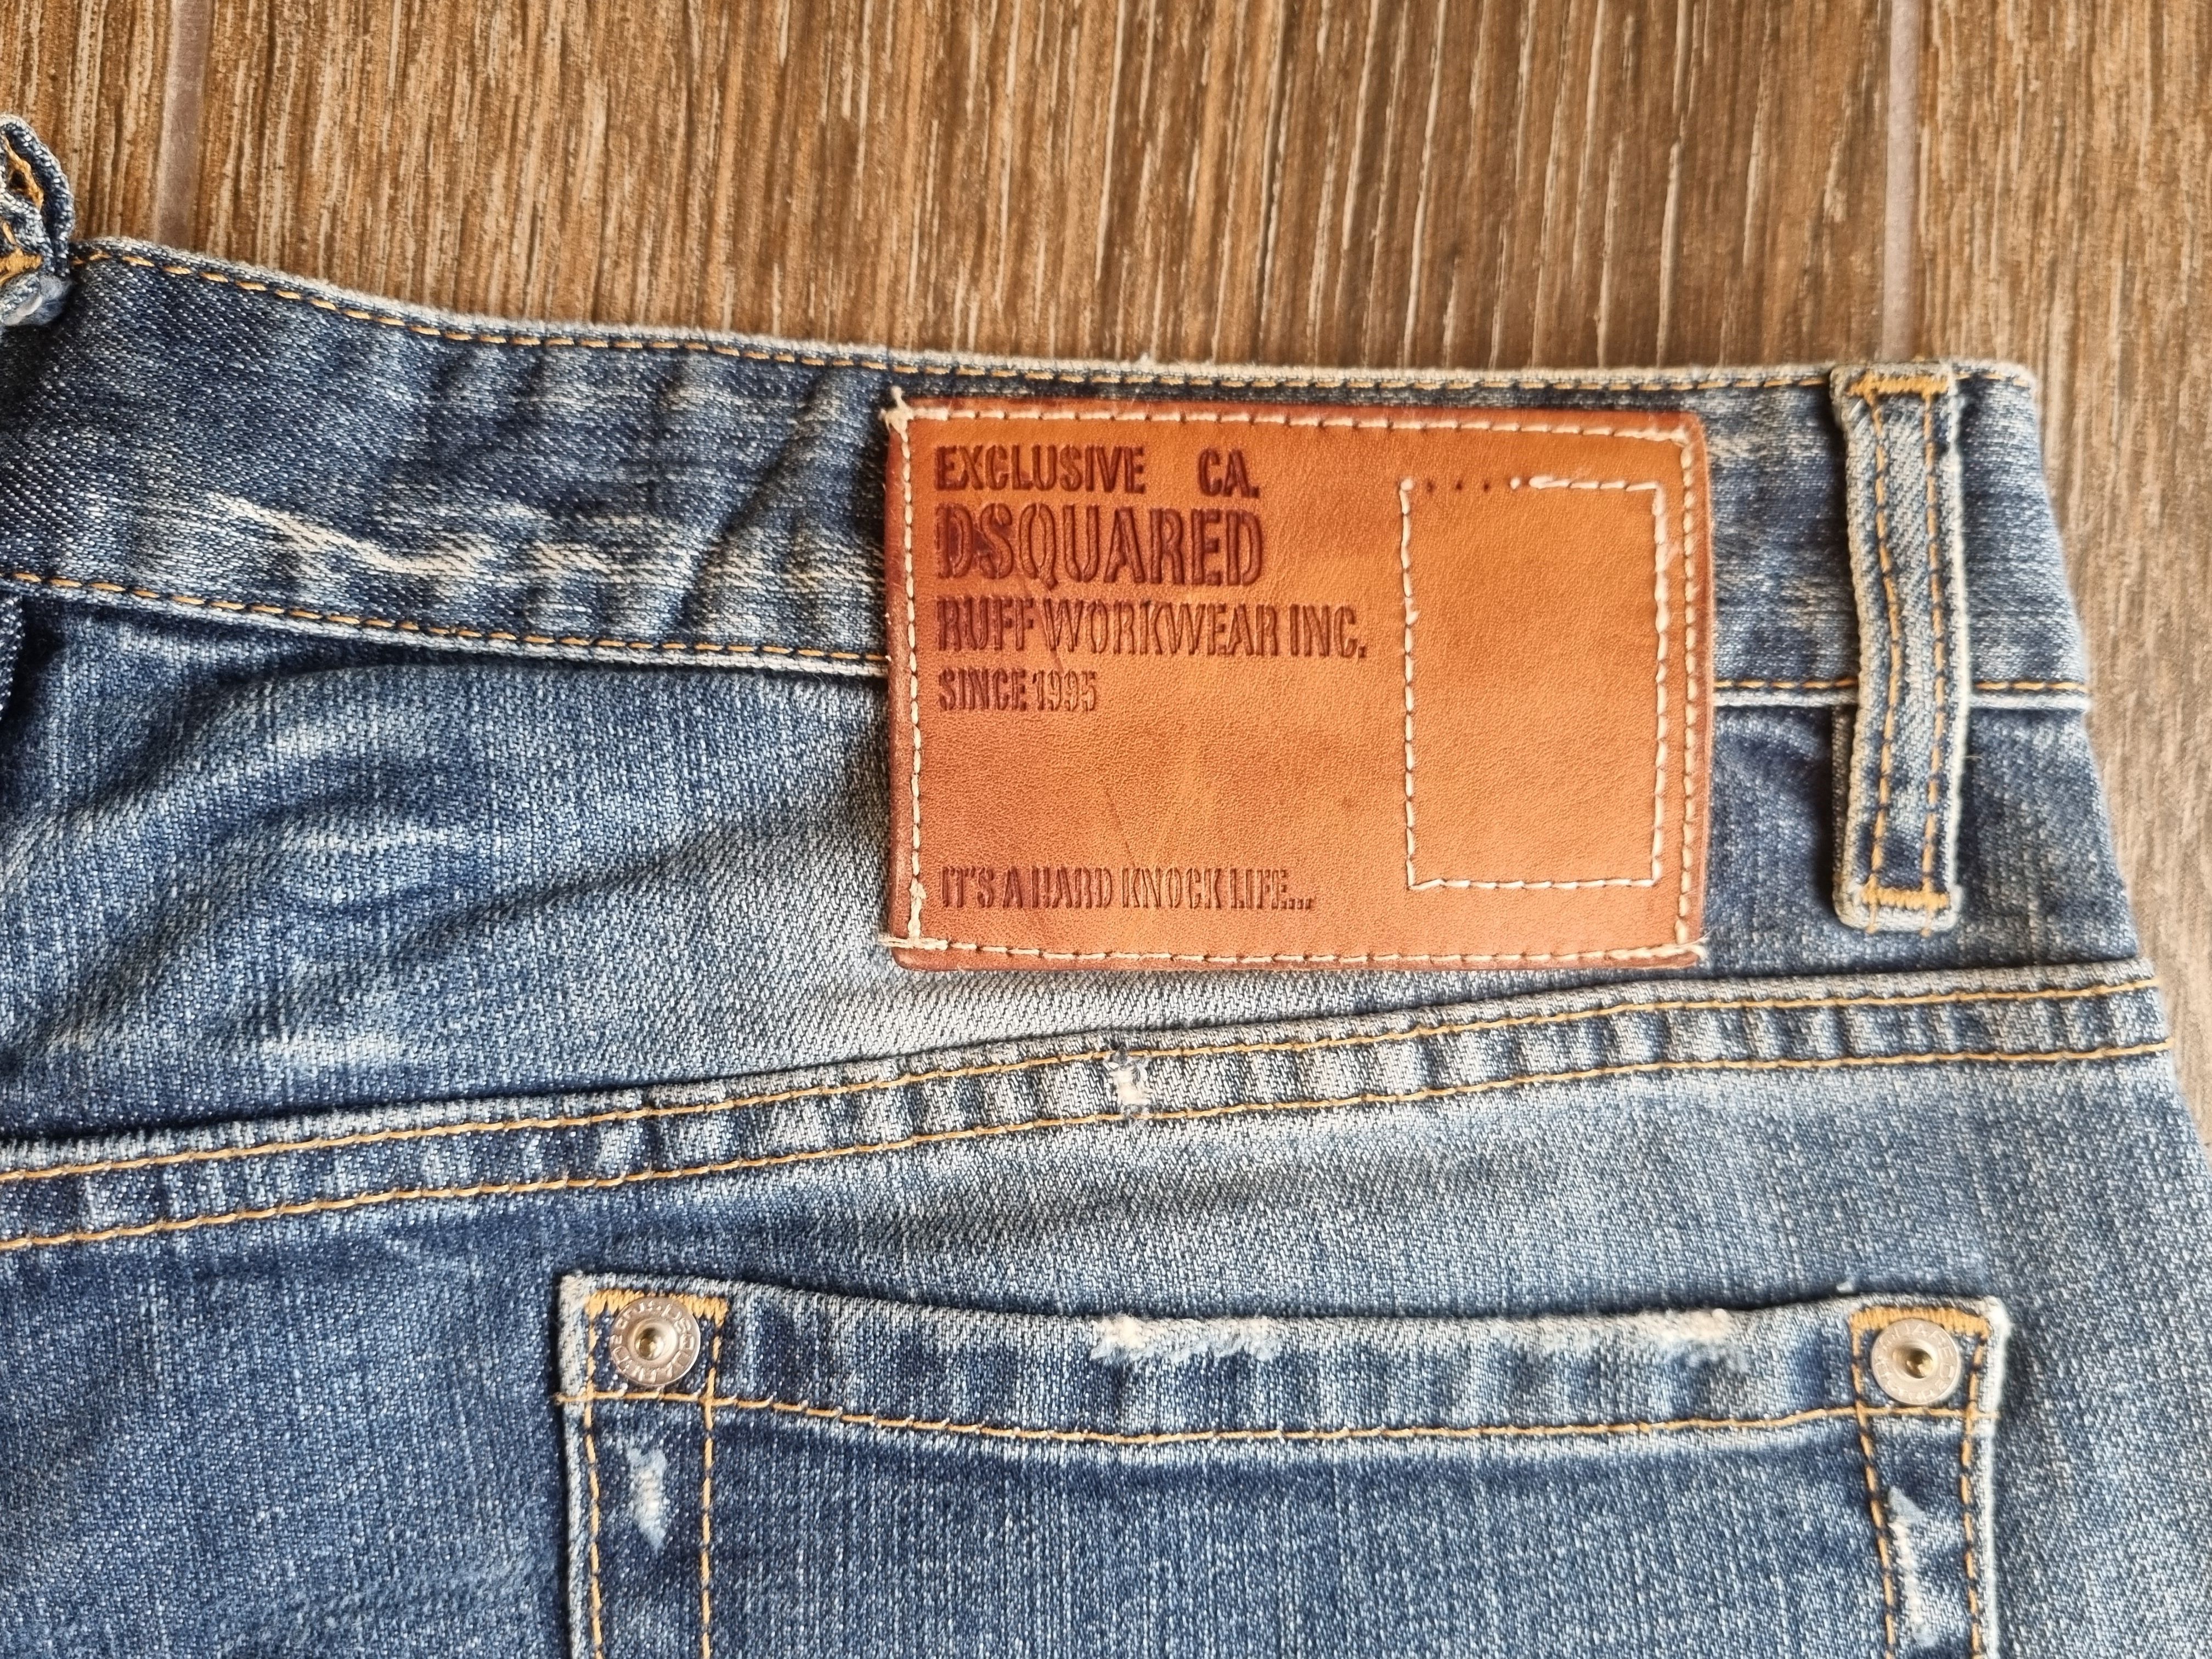 'It's A Hard Knock Life' stonewashed distressed jeans - 10